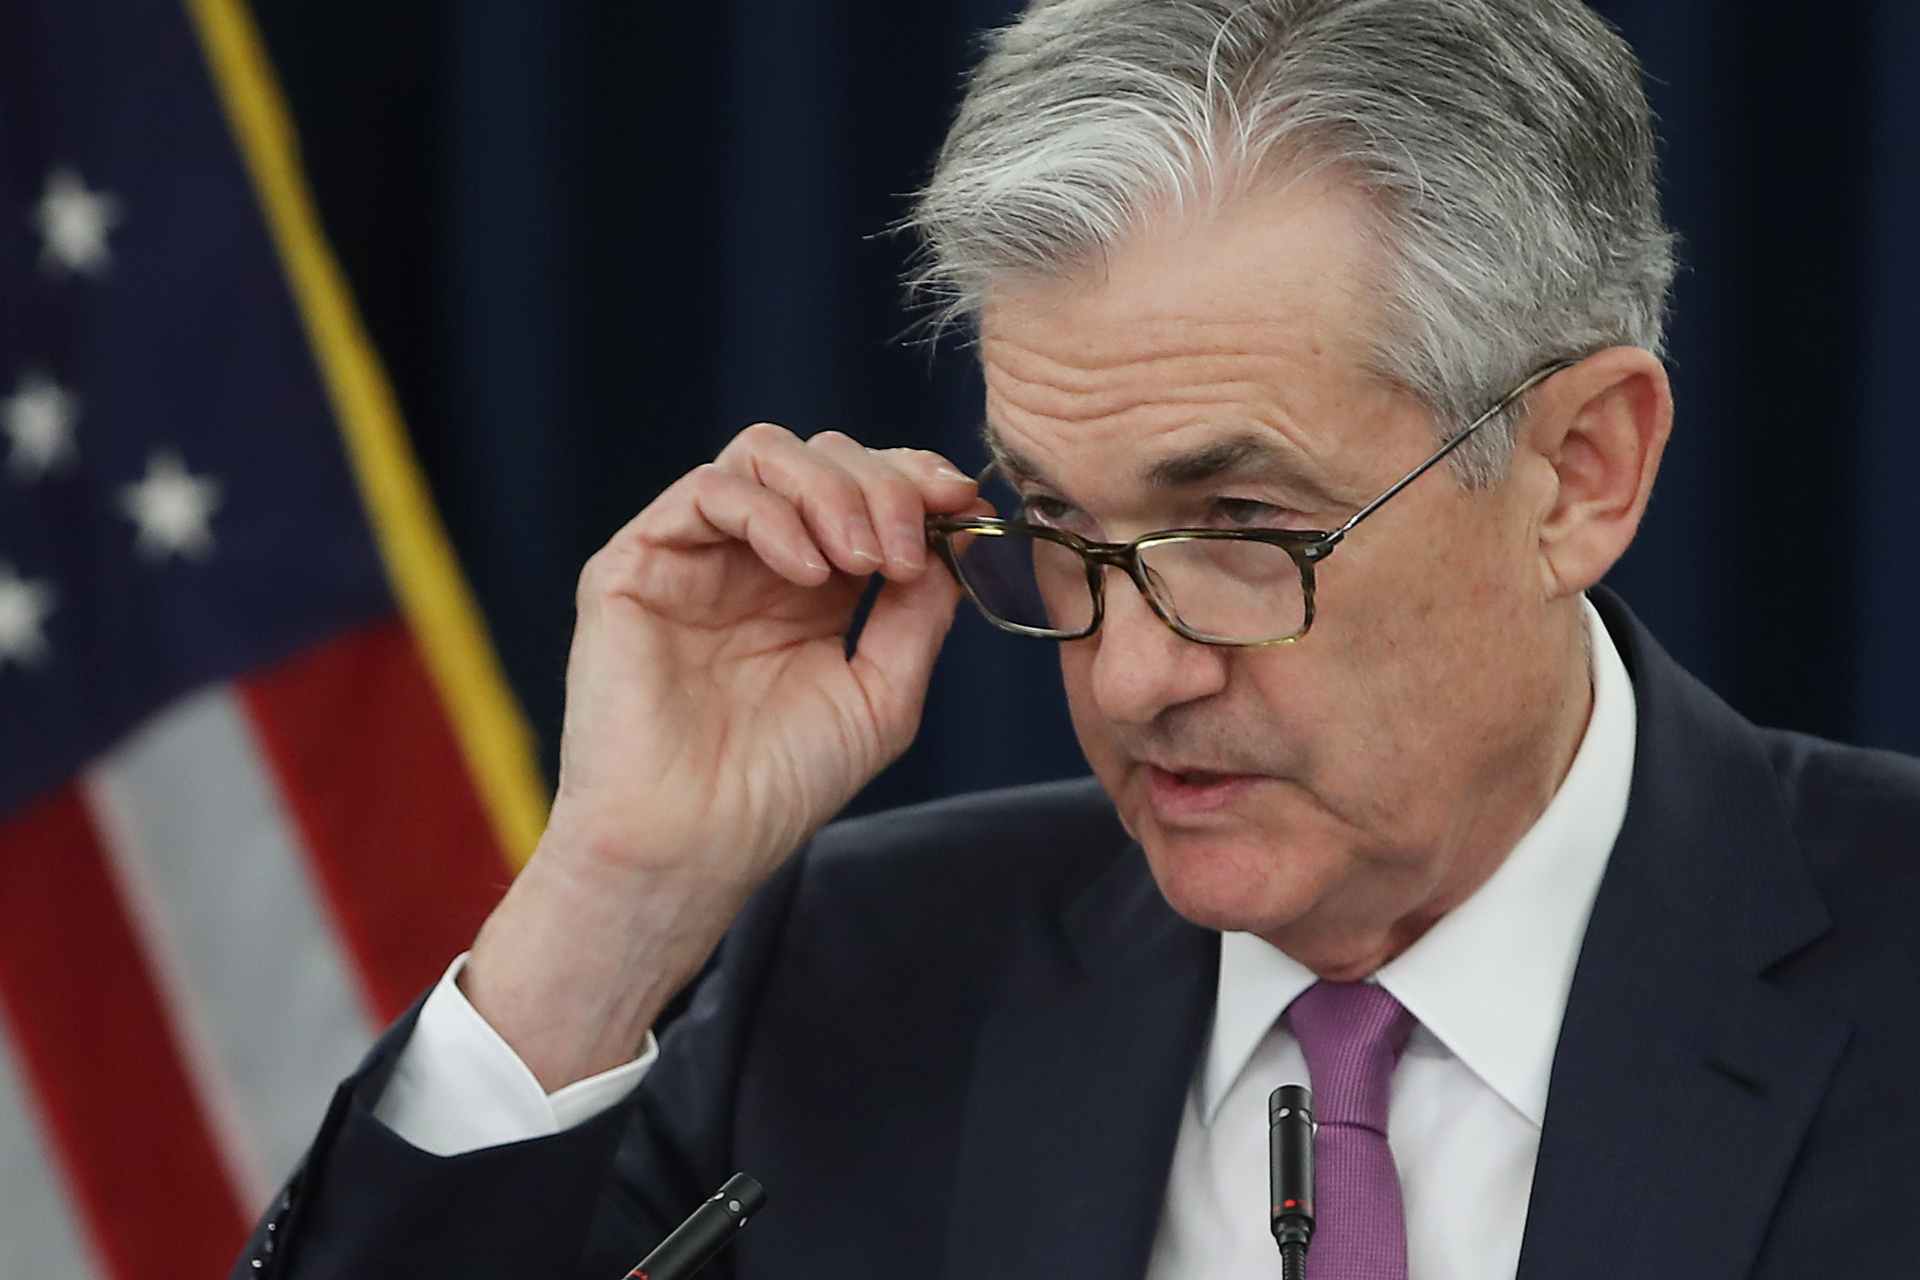 Powell just turned US Treasuries into the worst asset in your portfolio